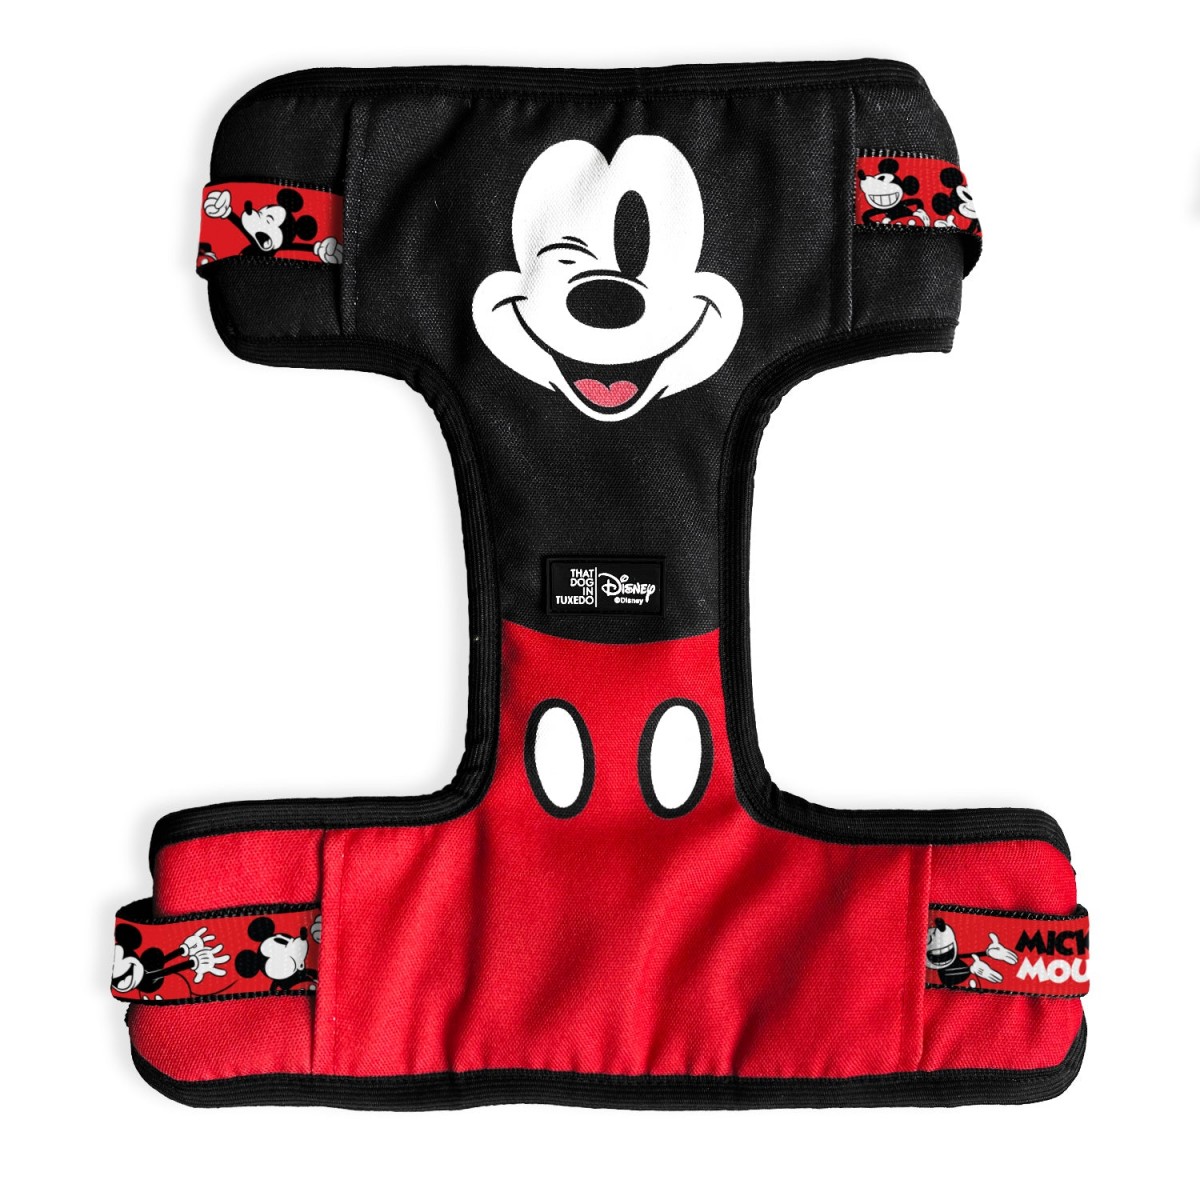 That Dog In Tuxedo Mickey Mouse Dog Mesh Harness